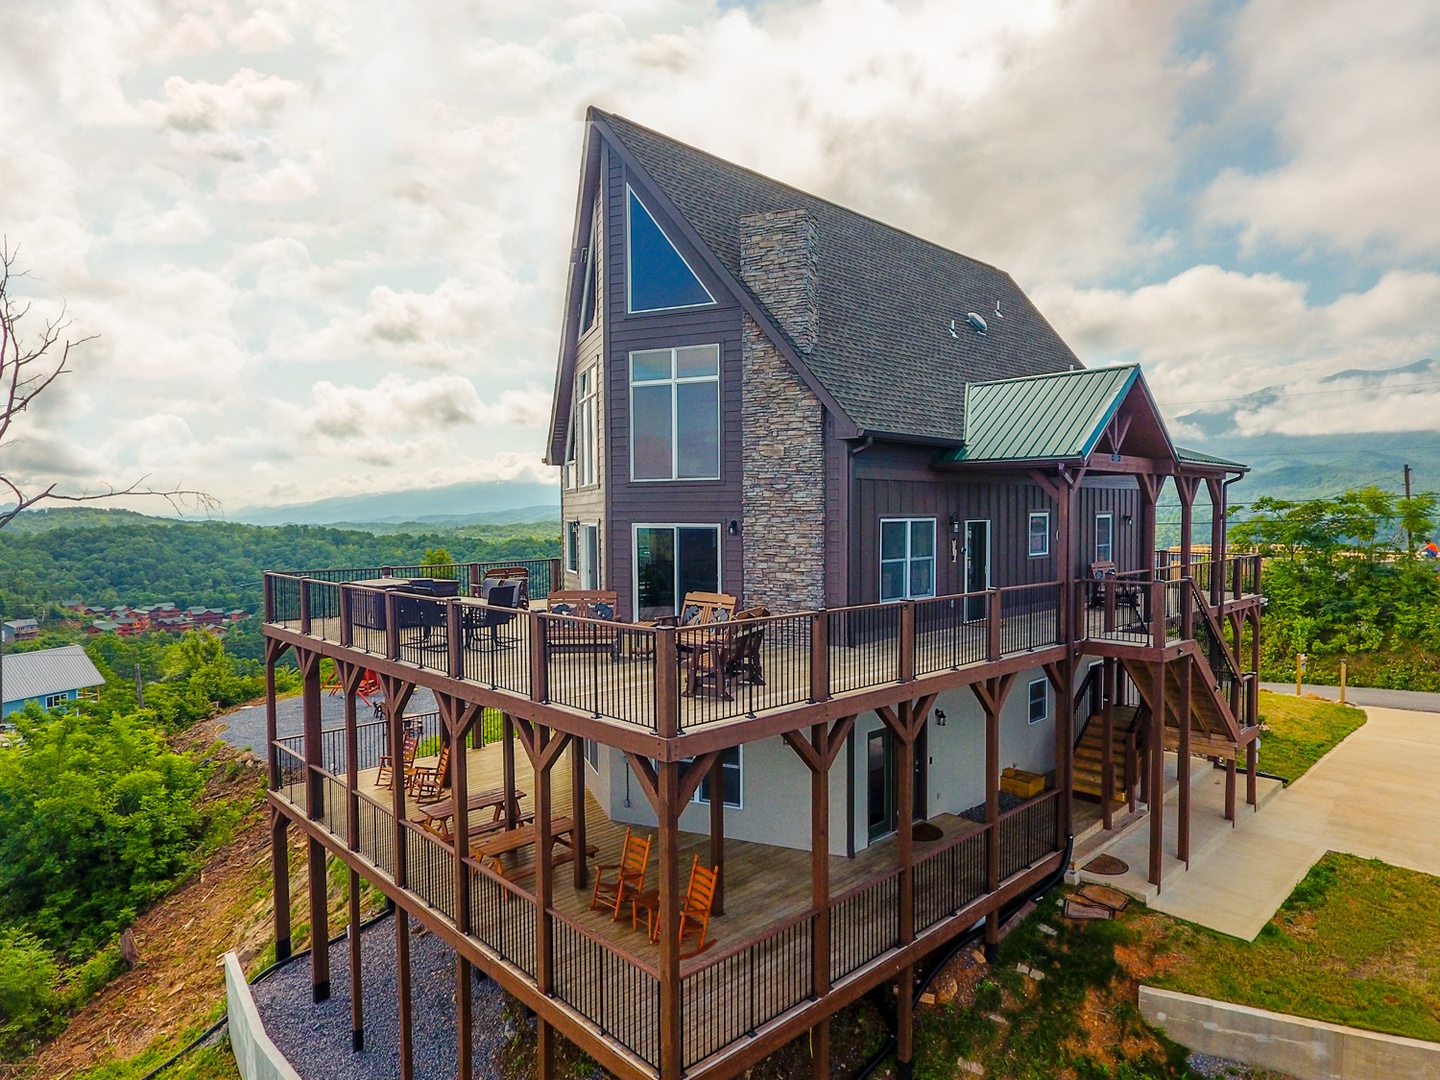 Front and Side Exterior View at The Best View Lodge, a 5 bedroom cabin rental located in gatlinburg